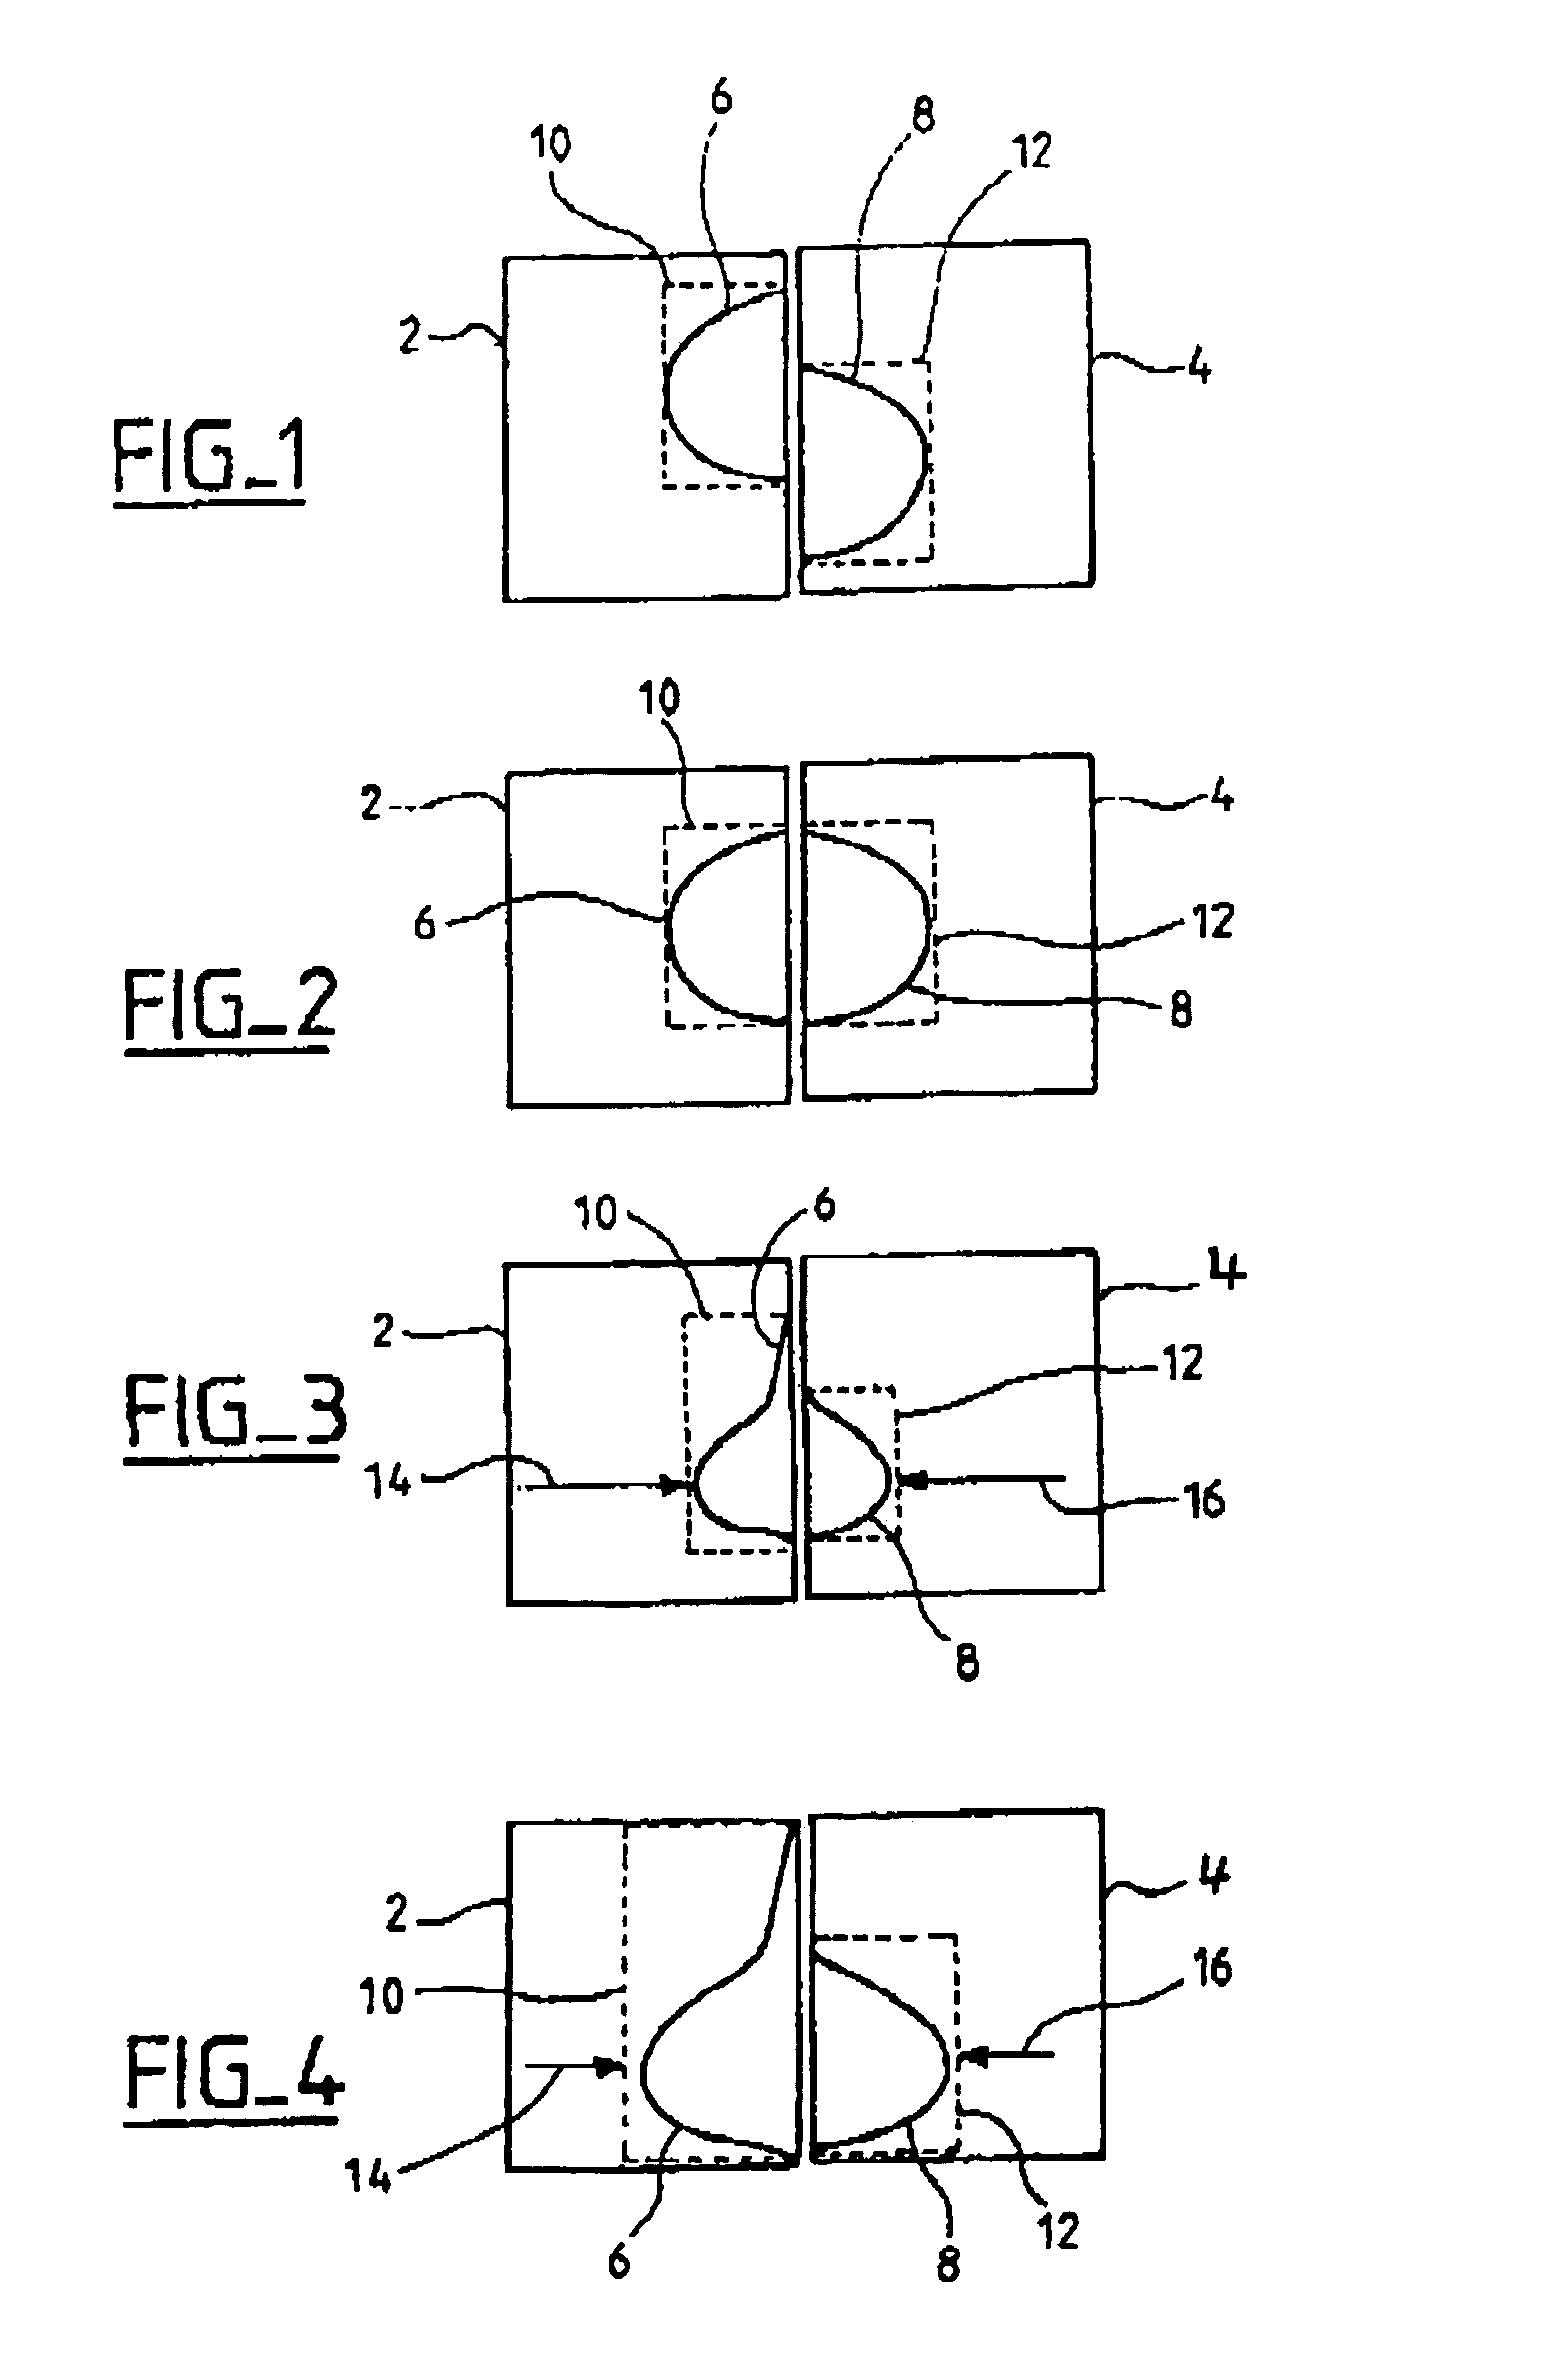 Method for simultaneous body part display